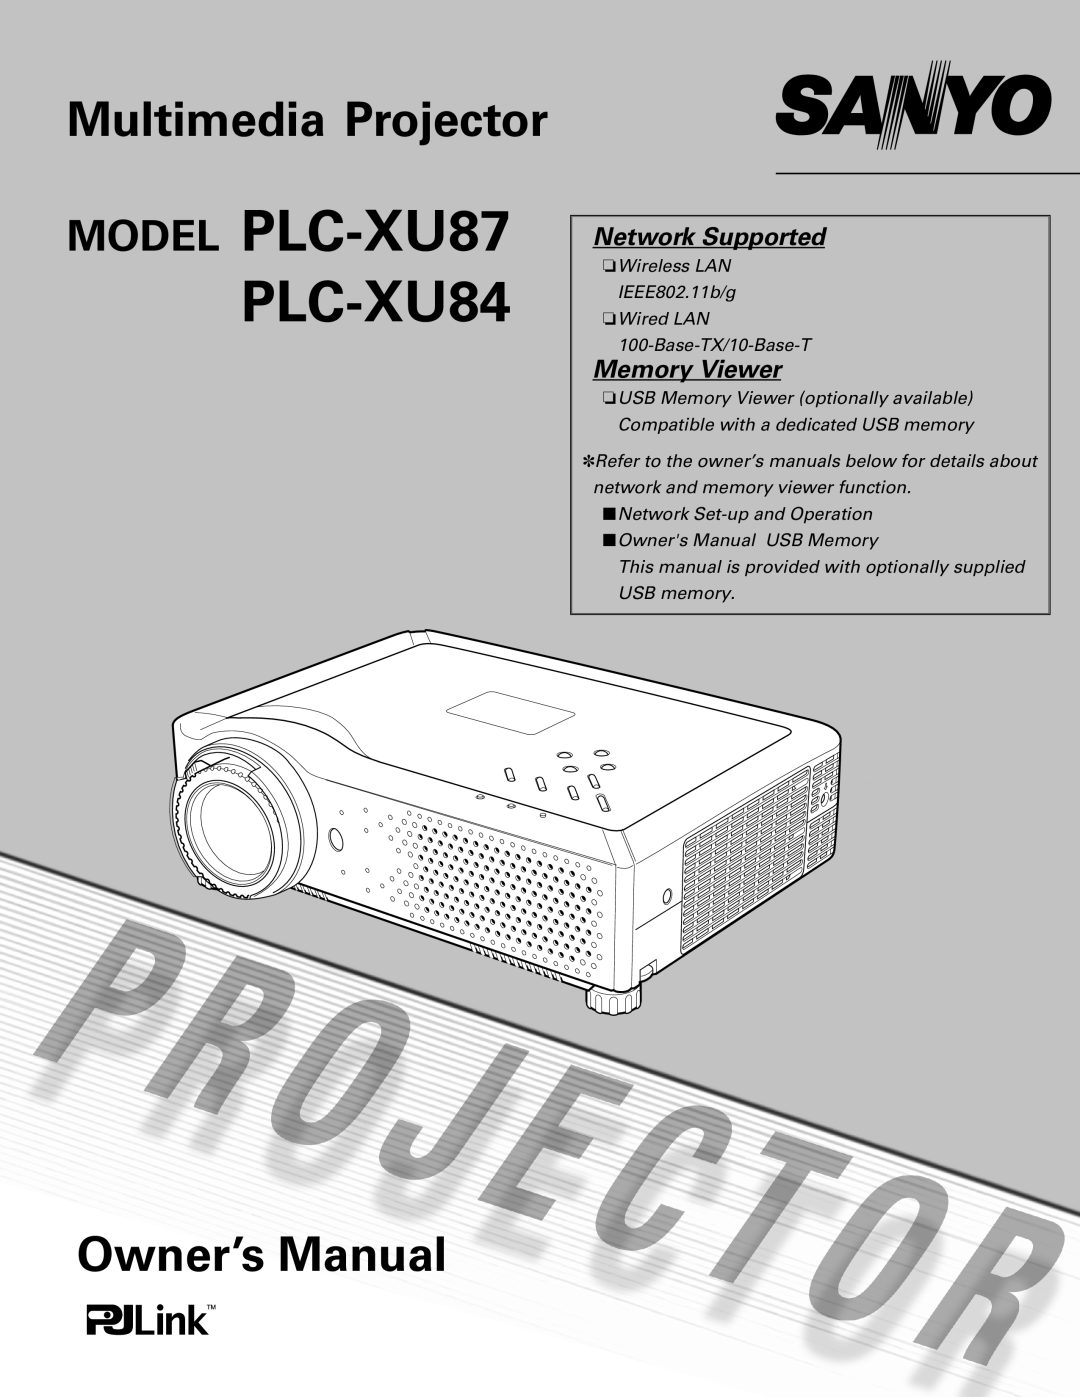 Sanyo owner manual Network Supported, Memory Viewer, MODEL PLC-XU87 PLC-XU84, Multimedia Projector, Owner’s Manual 